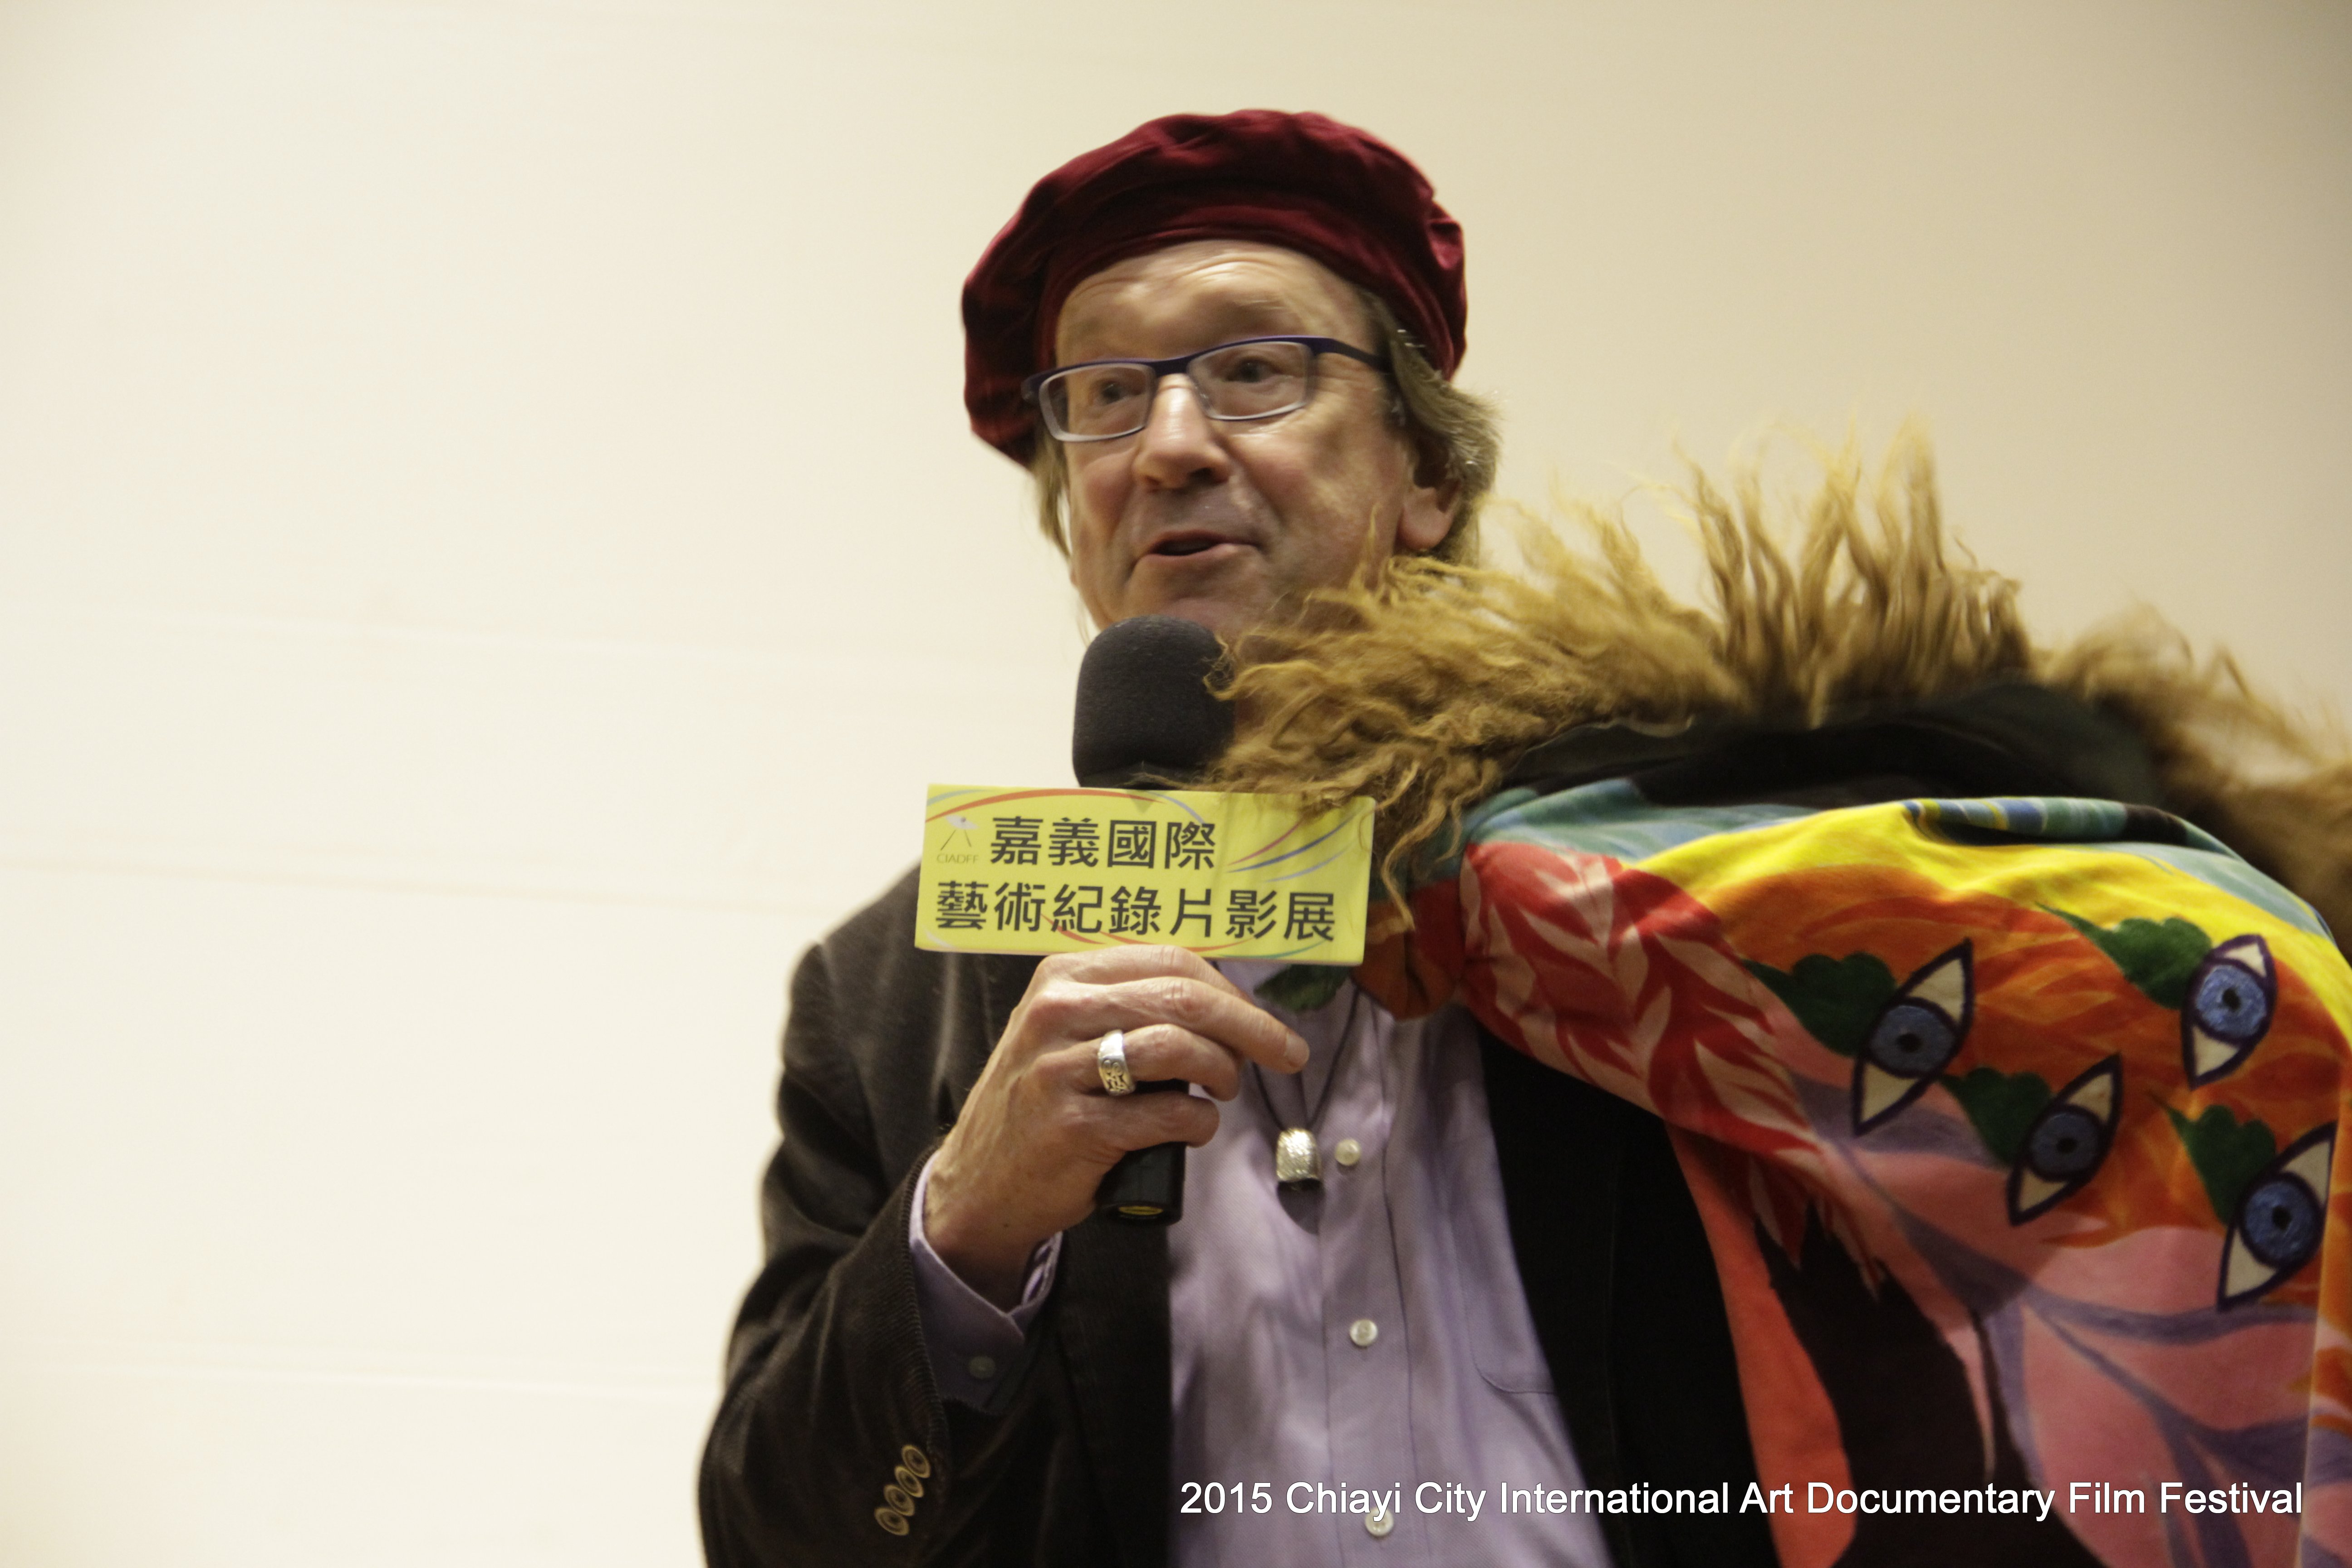 Stephen Silha with James Broughton's cape at Q&A, Chiayi City International Art Documentary Film Festival, Taiwan